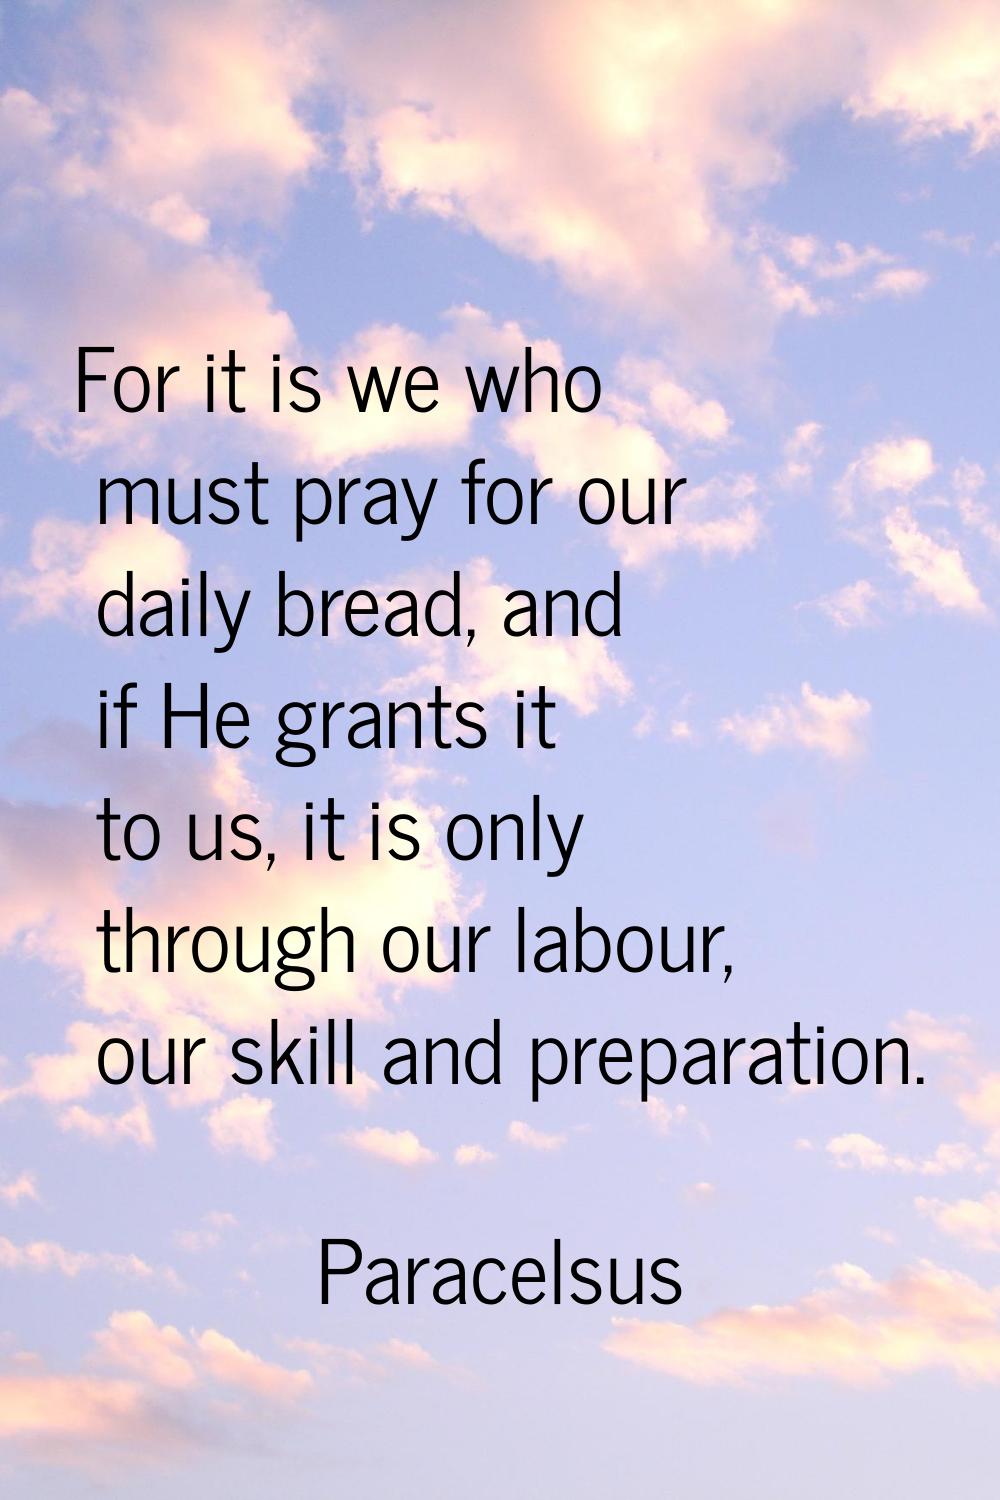 For it is we who must pray for our daily bread, and if He grants it to us, it is only through our l